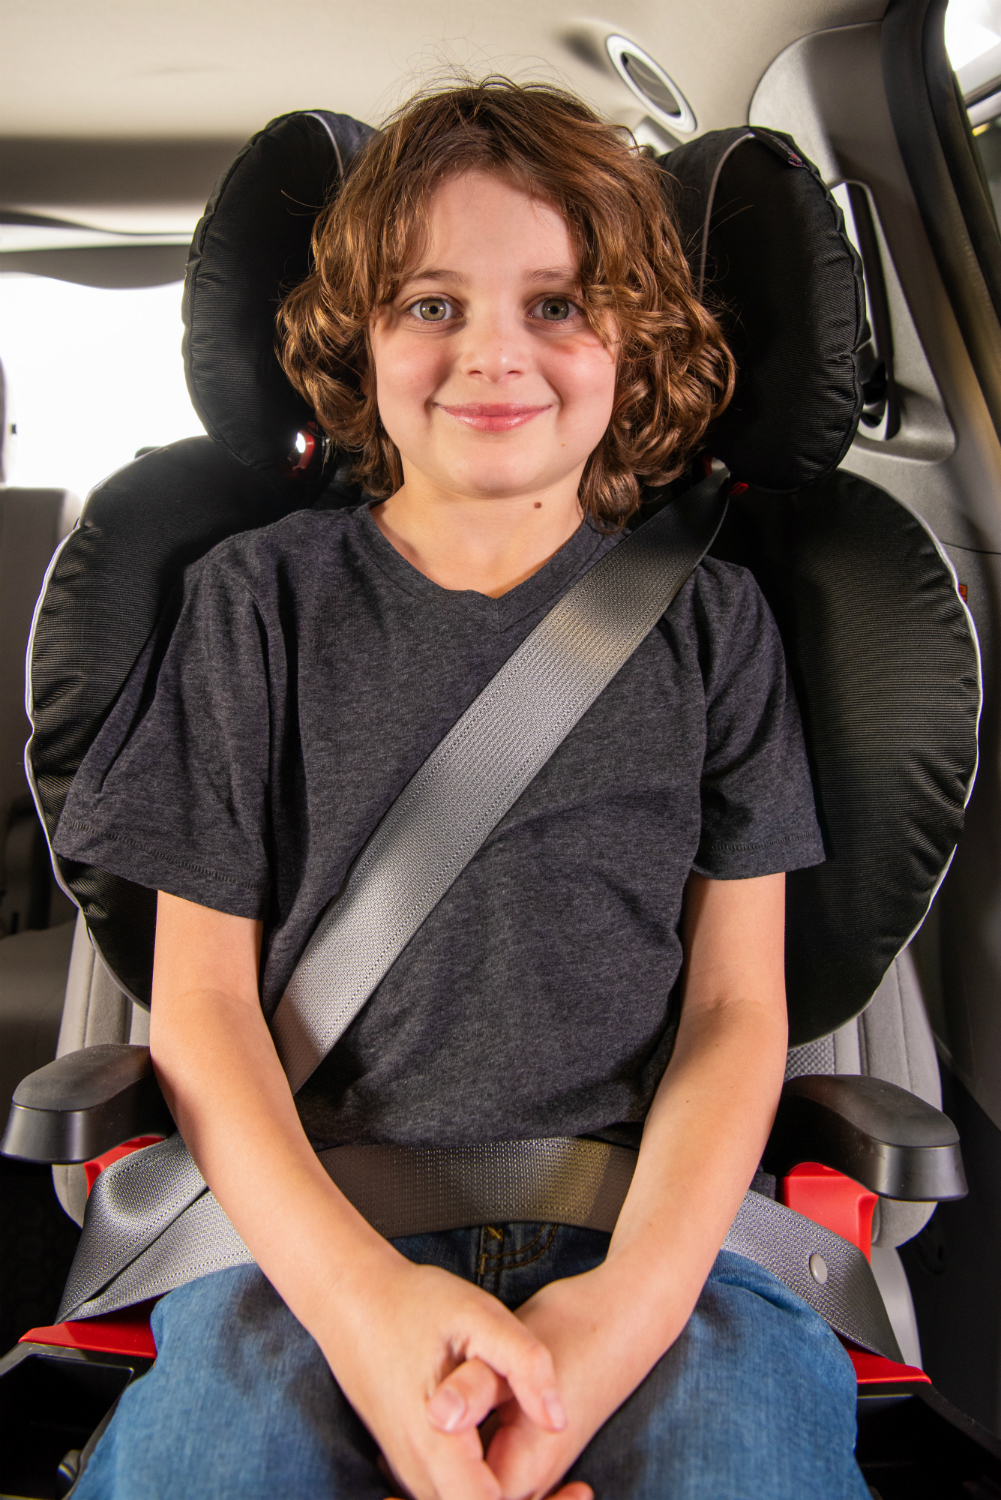 Stage 3 Booster Seats - When Did Child Car Seats Become Mandatory In Canada